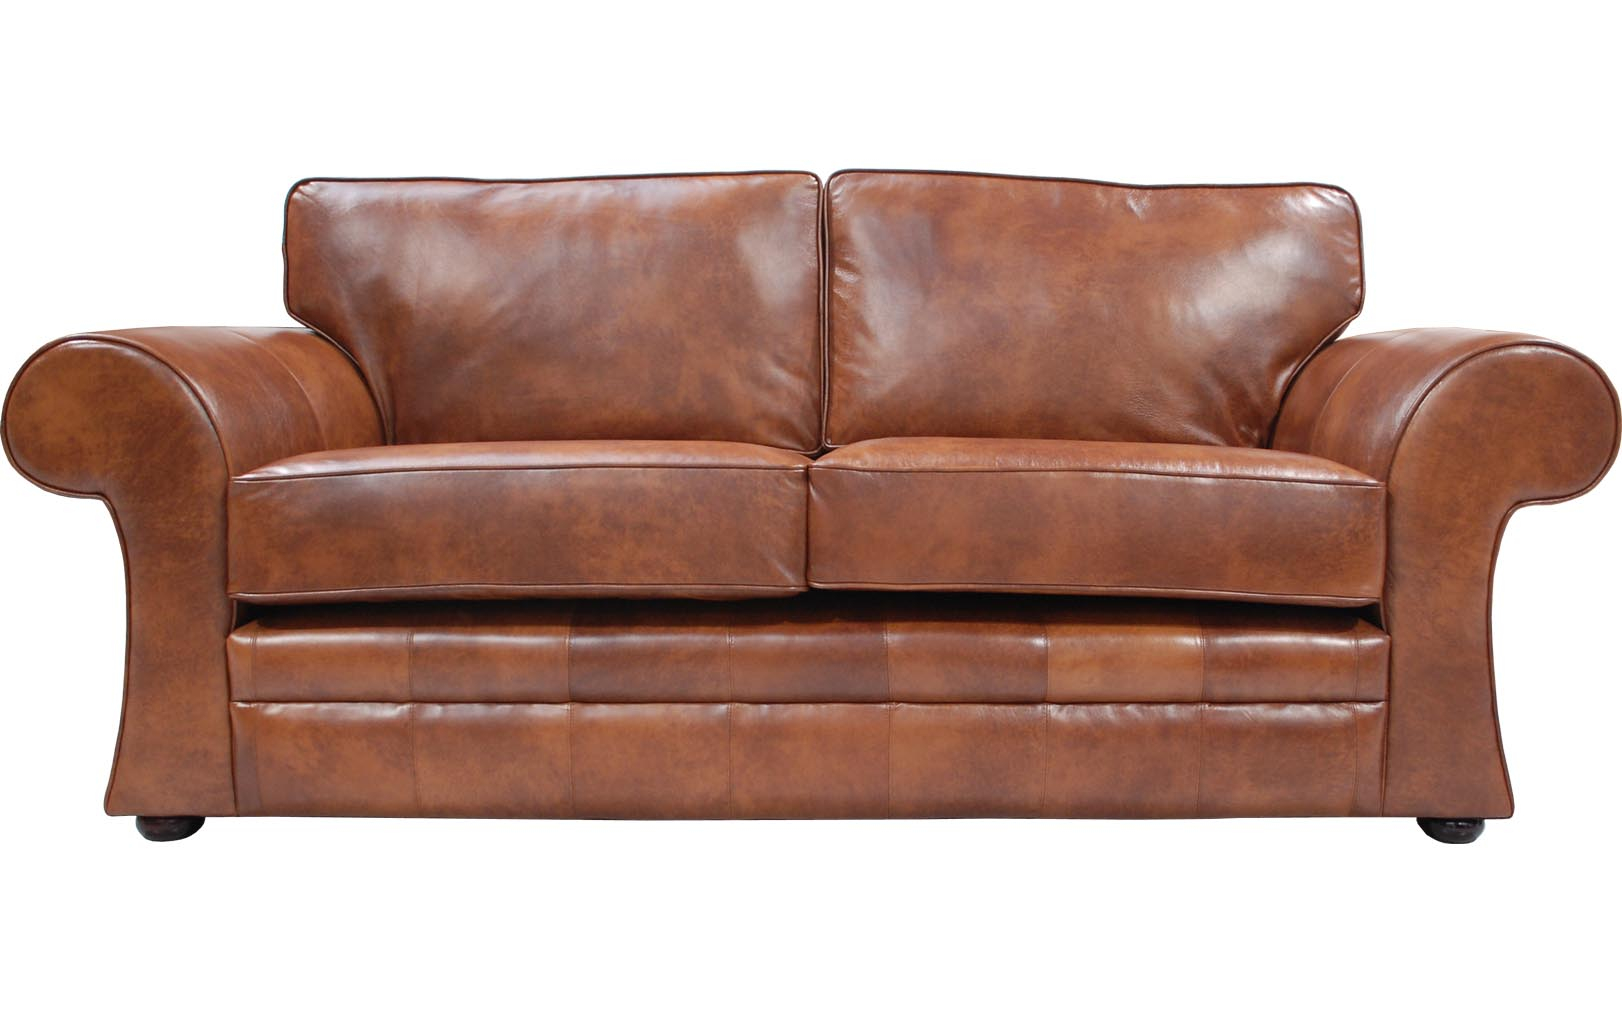 Cavan Real Leather Sofa Bed intended for proportions 1622 X 1014